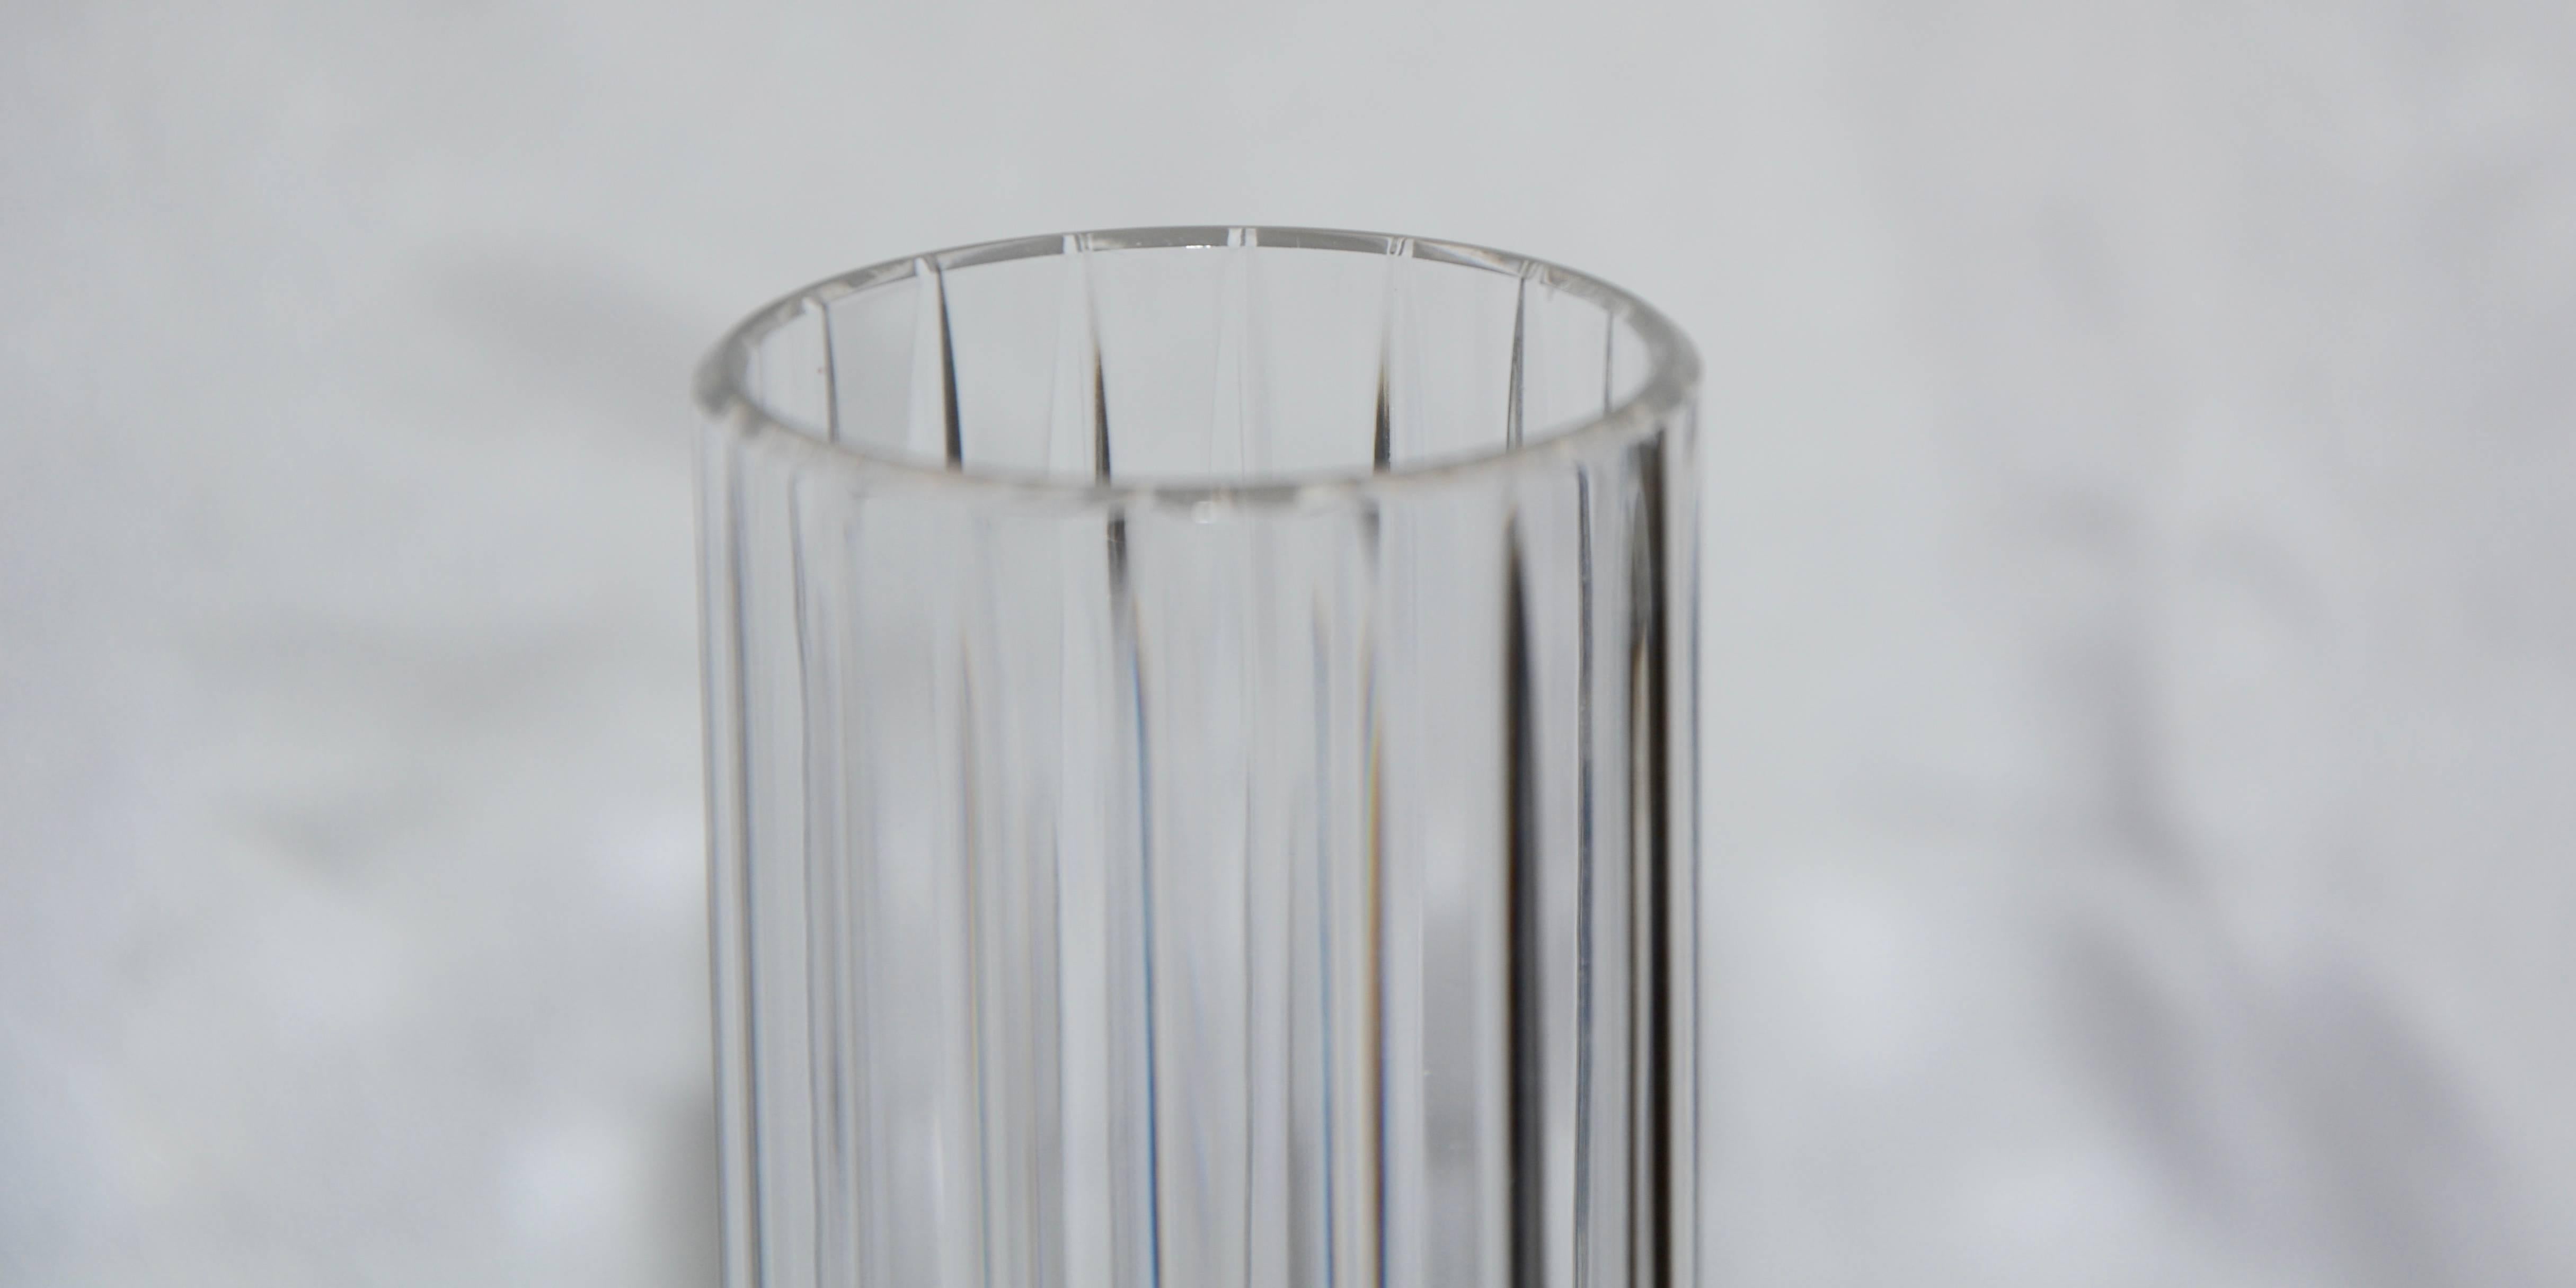 Elegant clear cut crystal forms this daffodil vase by Baccarat of Italy. The vertical ribs are perfectly cut to add to its beauty. The Baccarat mark is on the bottom of the vase.